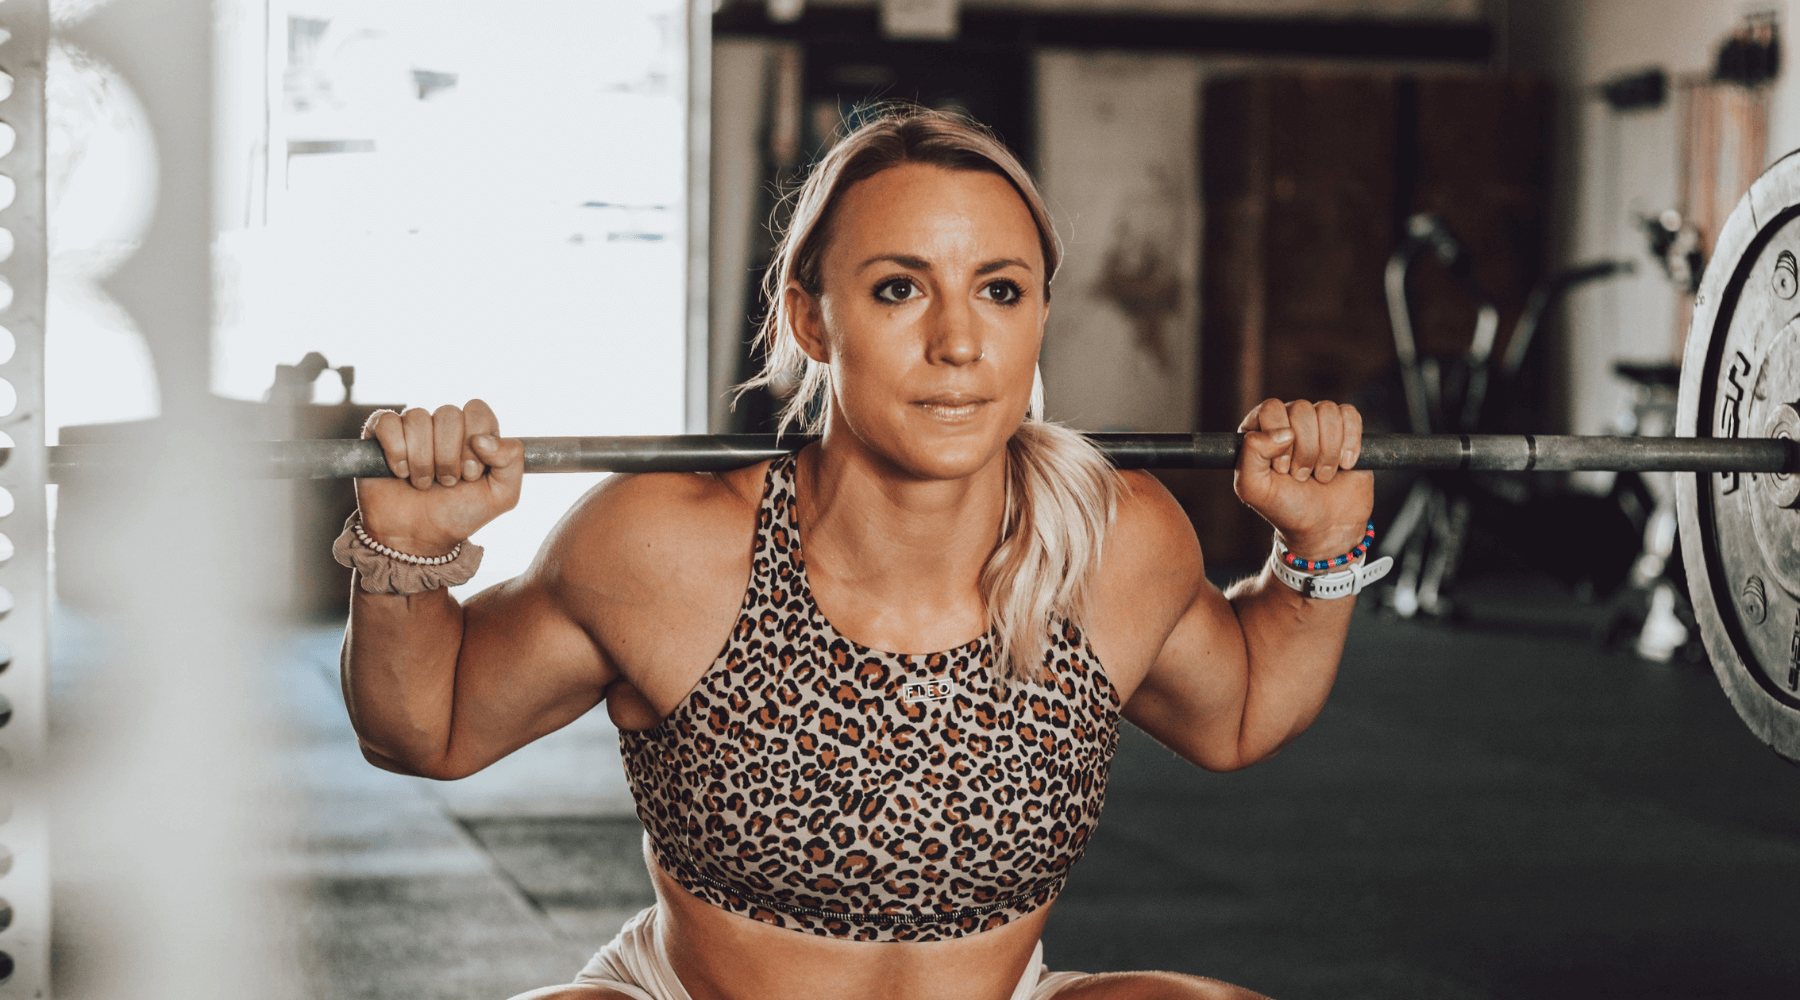 Army Capt. Jennifer M. Moreno CrossFit Hero Jenny WOD Workout - V3 Apparel womens activewear, gym clothing and fitness athleisure